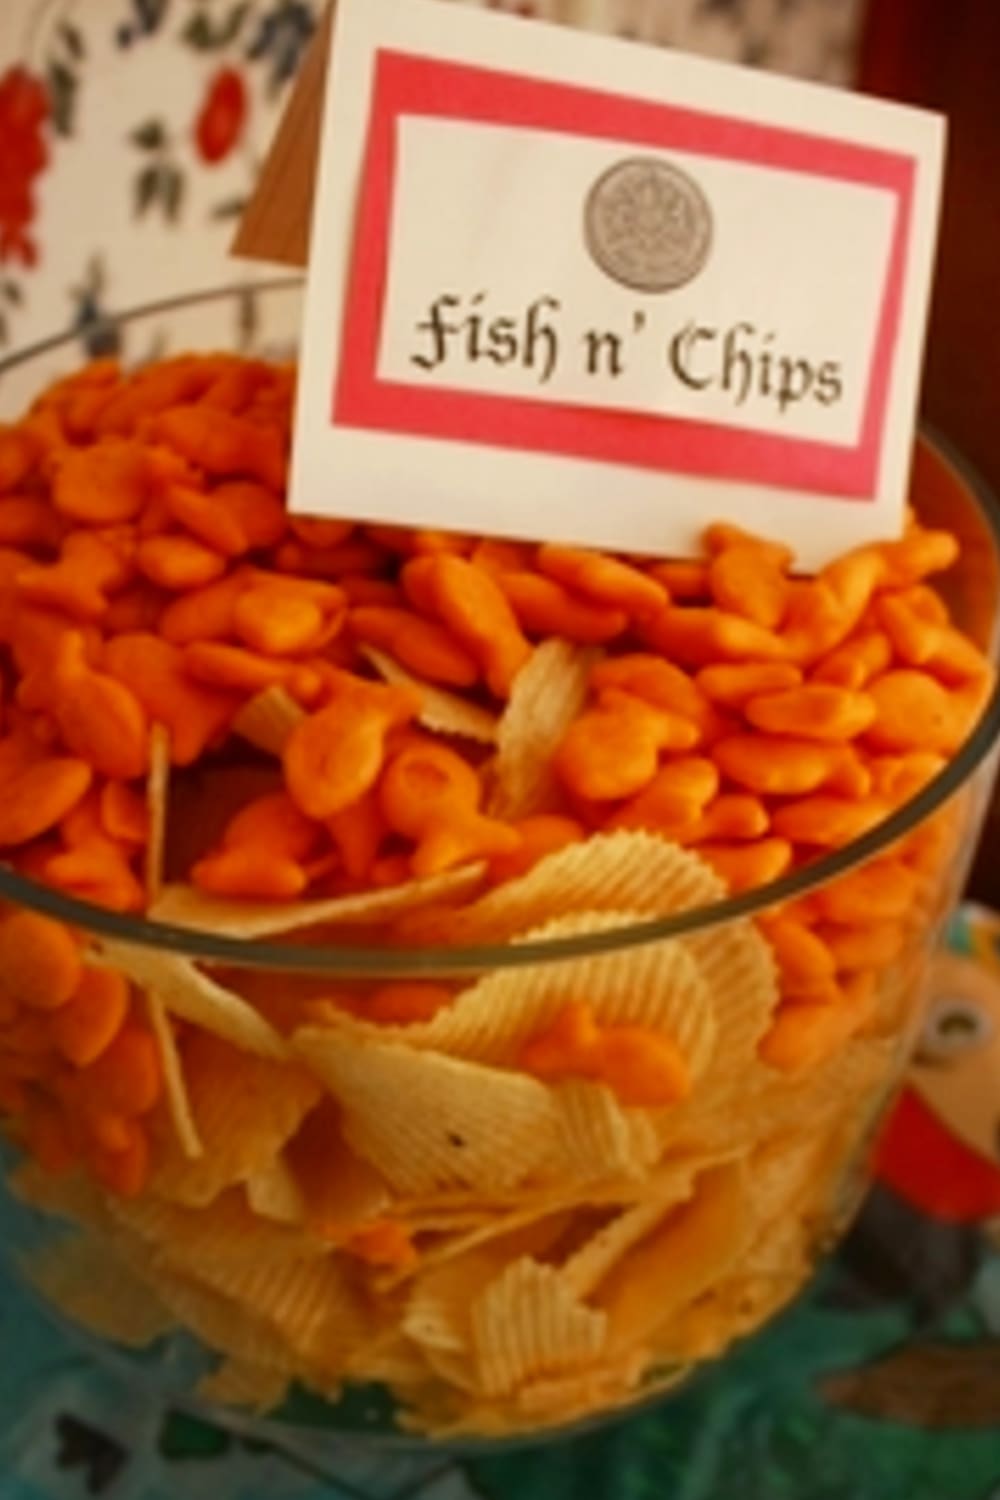 Potluck food ideas - funny main dish for a potluck dinner - fish and chips - would be really cute and EASY party snack food!